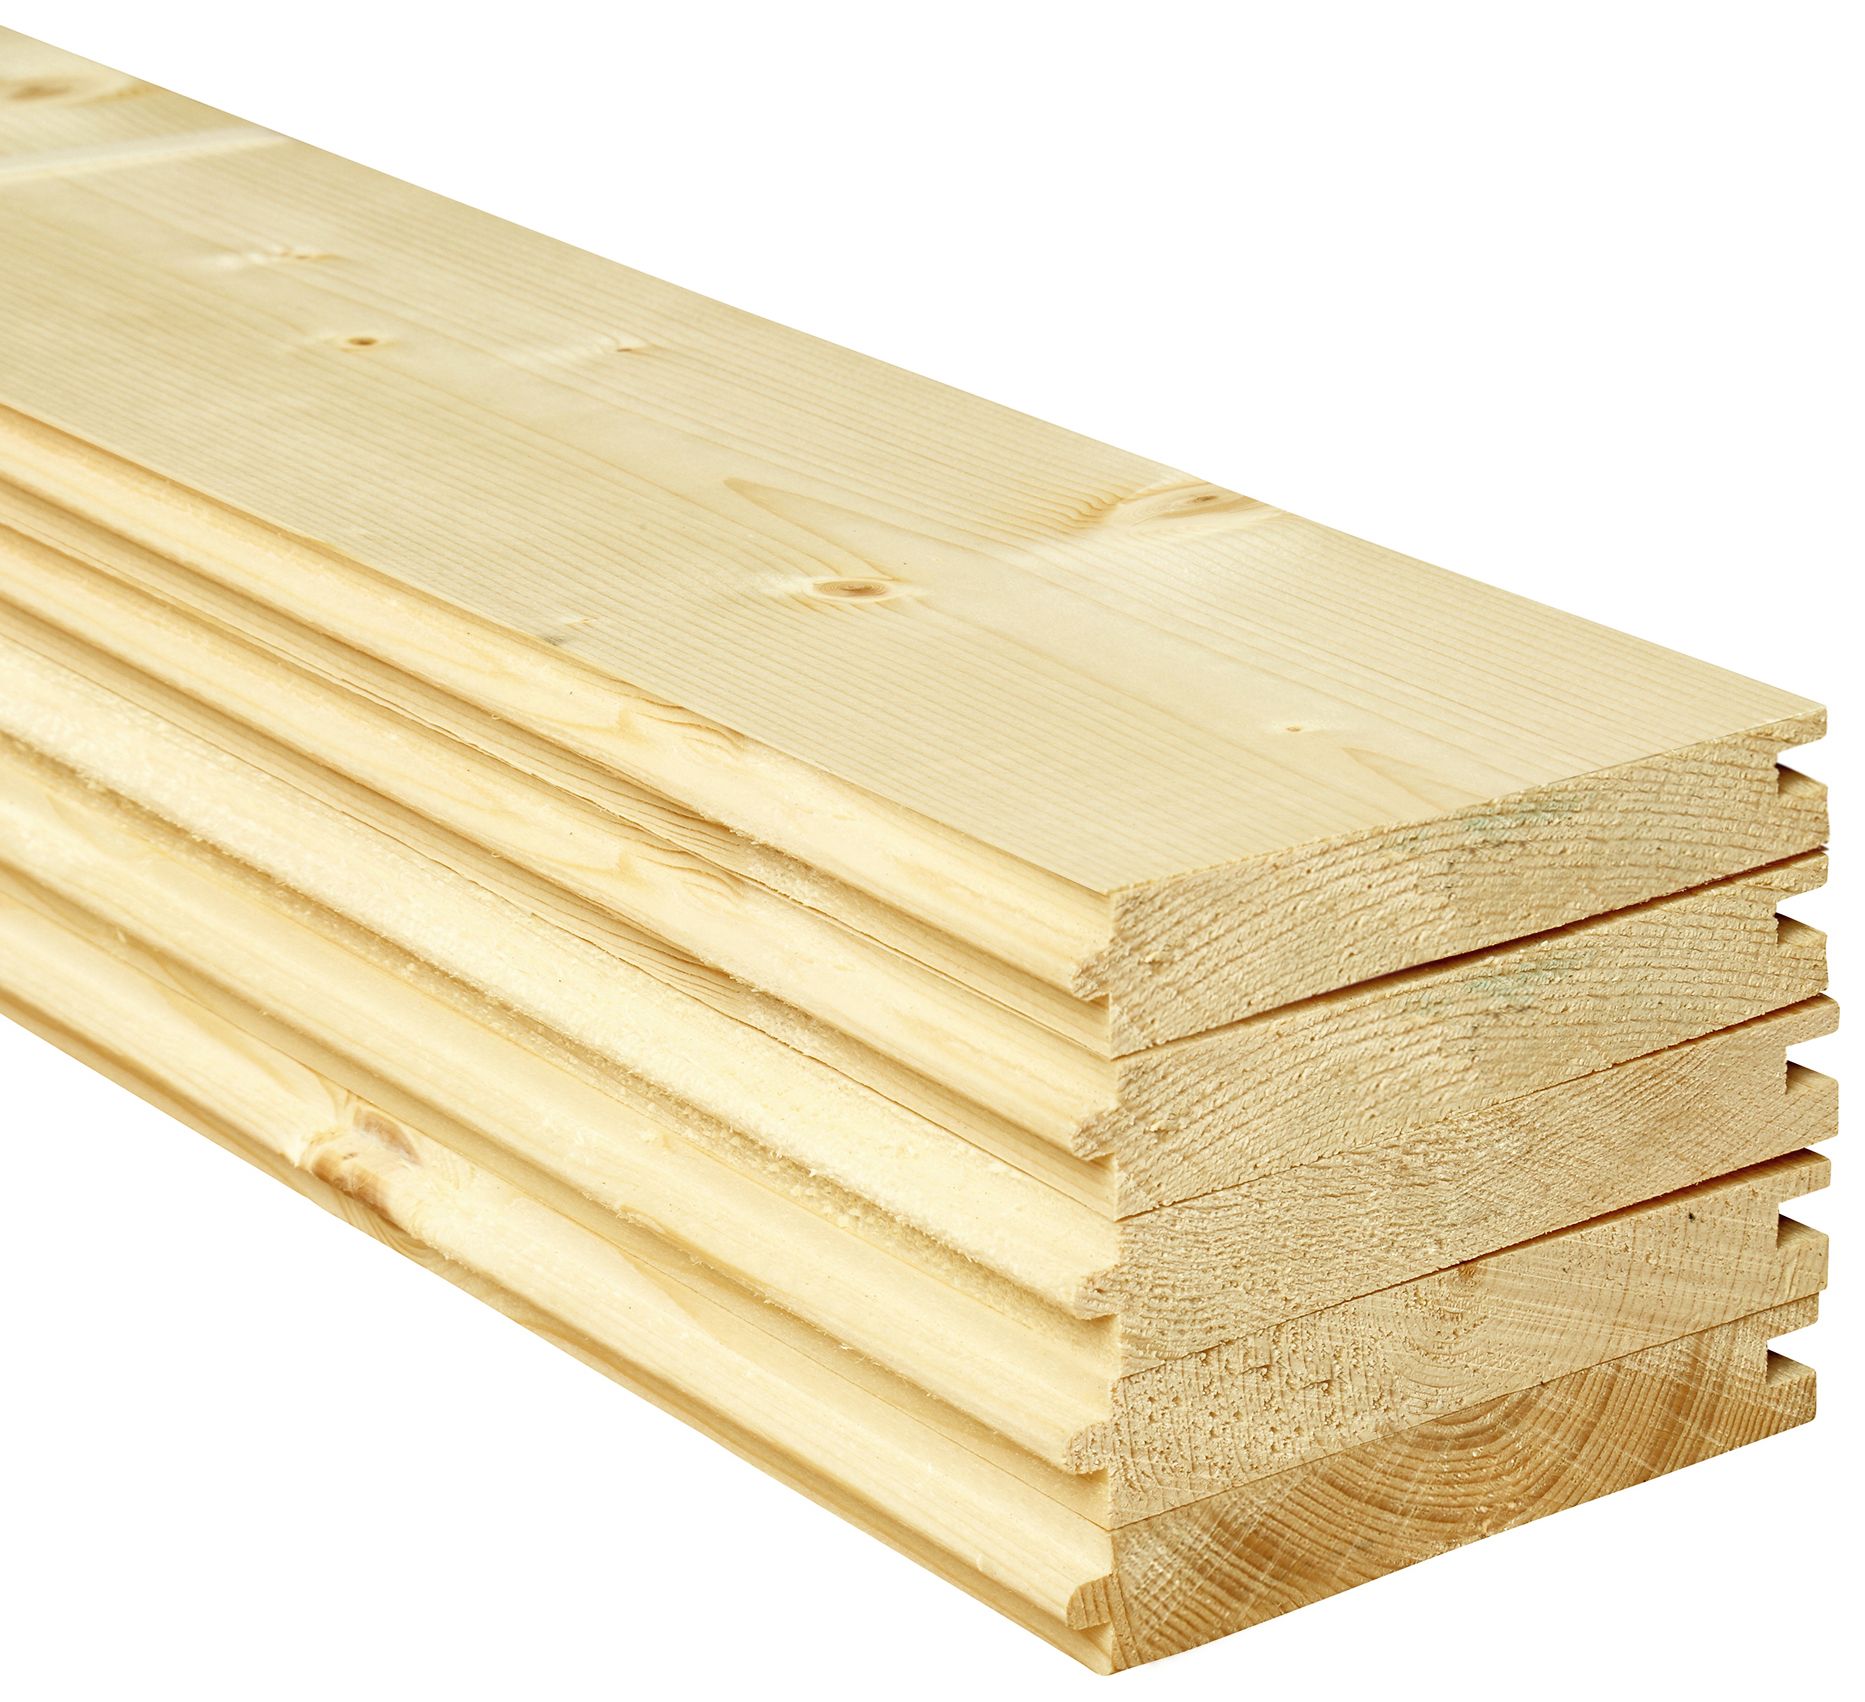 PTG Floorboards - 18mm x 144mm x 3000mm - Pack of 5